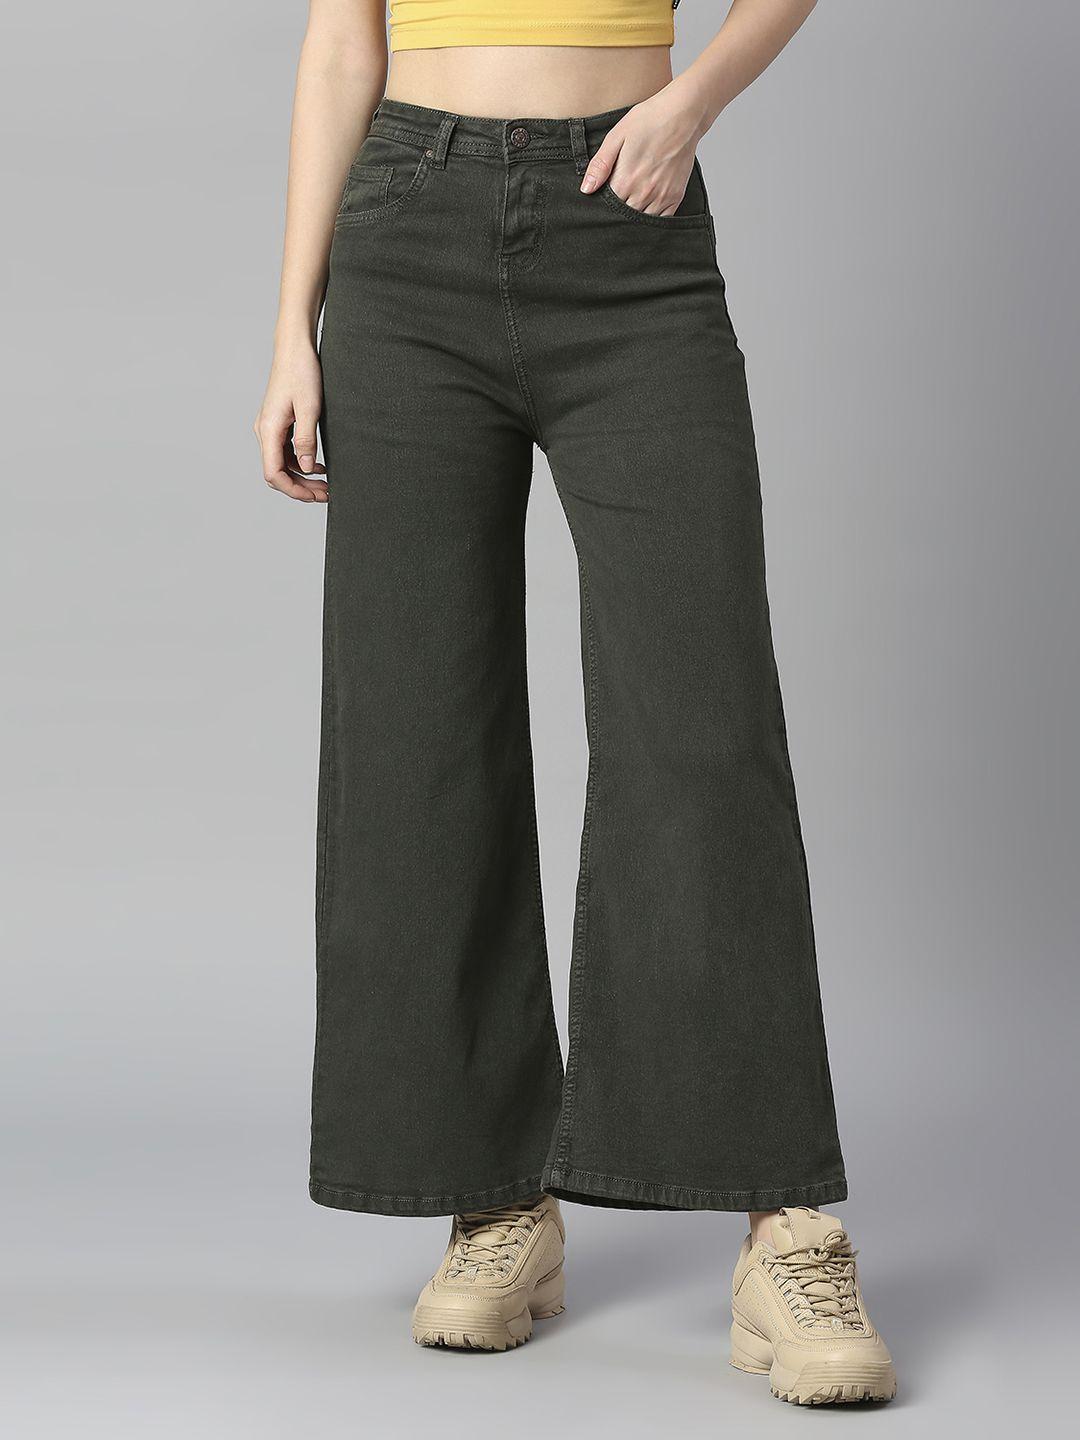 high-star-women-green-wide-leg-high-rise-stretchable-jeans